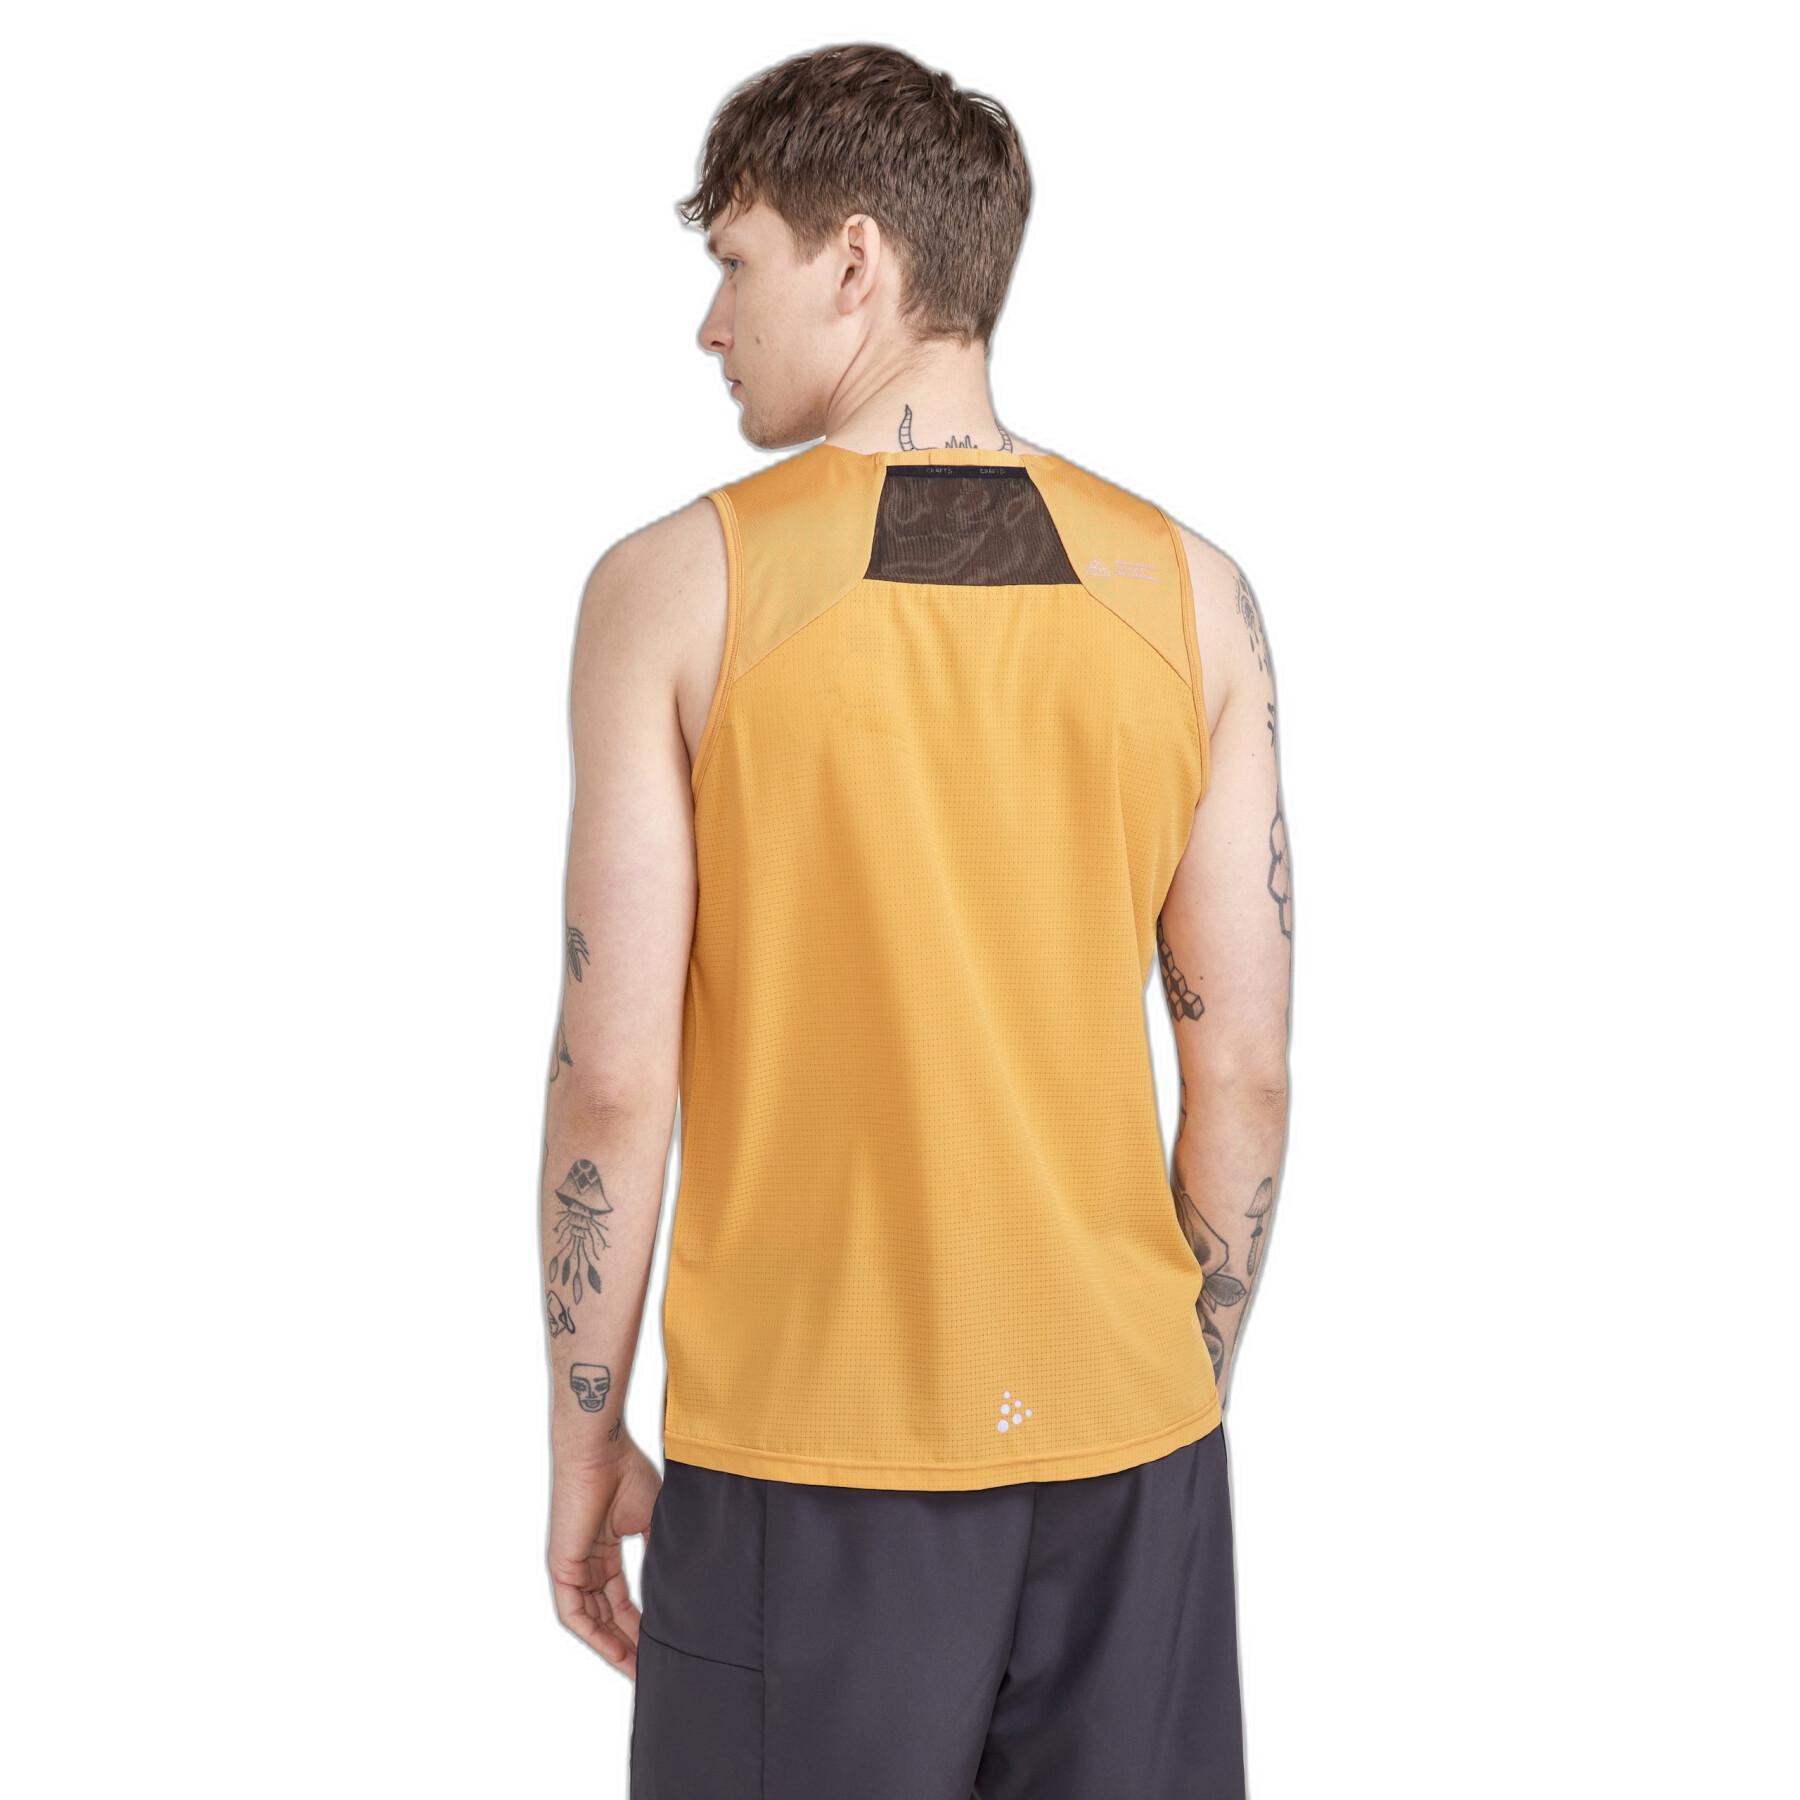 Tampo do tanque Craft Pro Trail Singlet